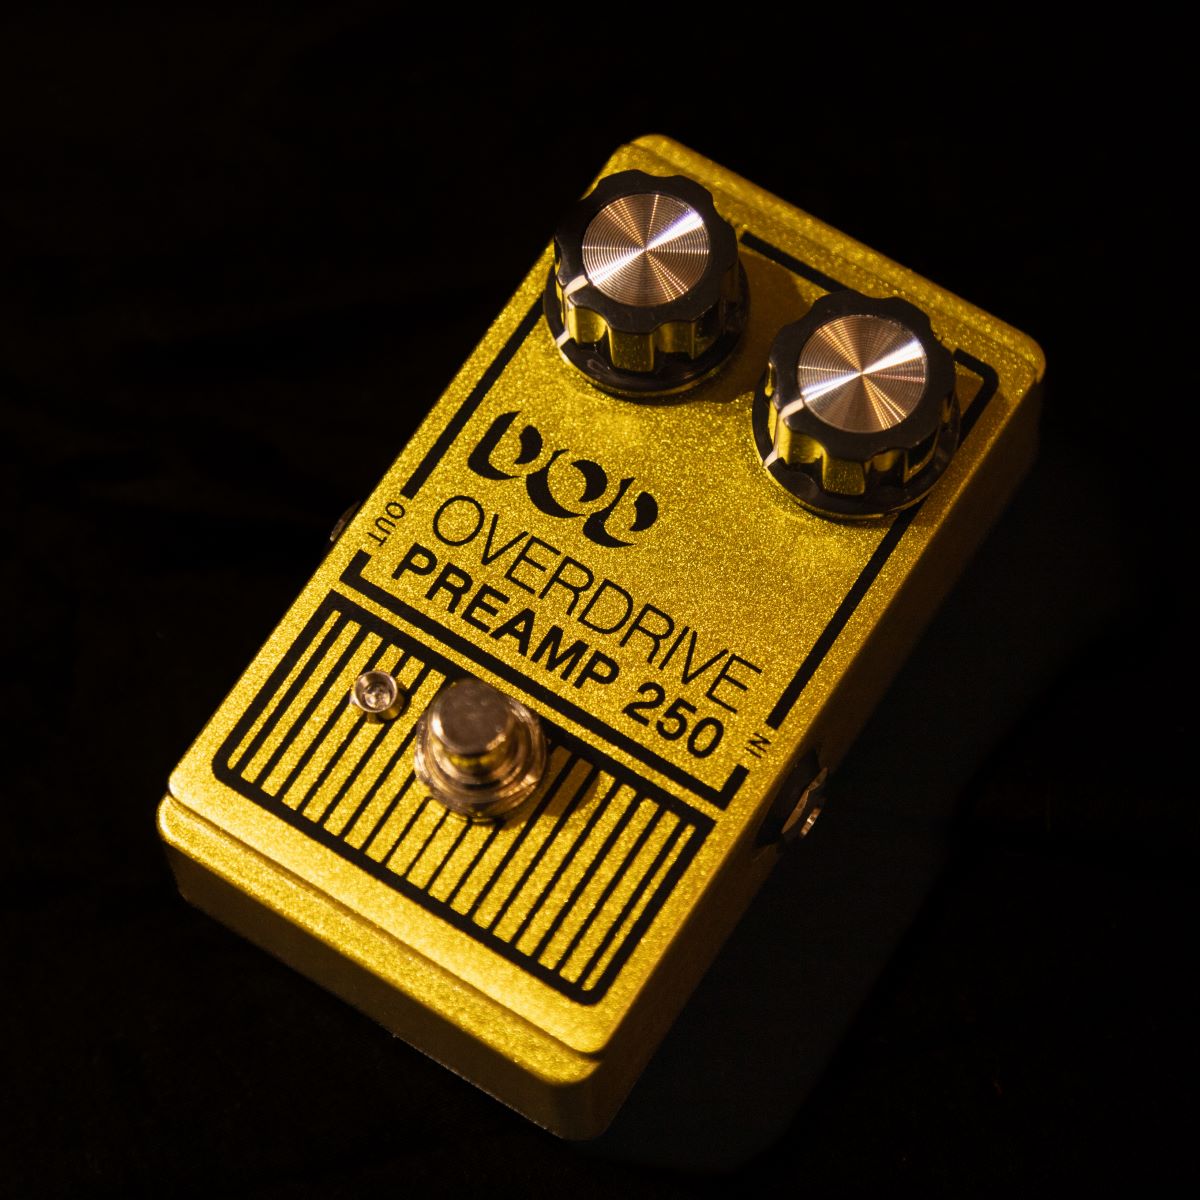 DOD Overdrive / Preamp 250